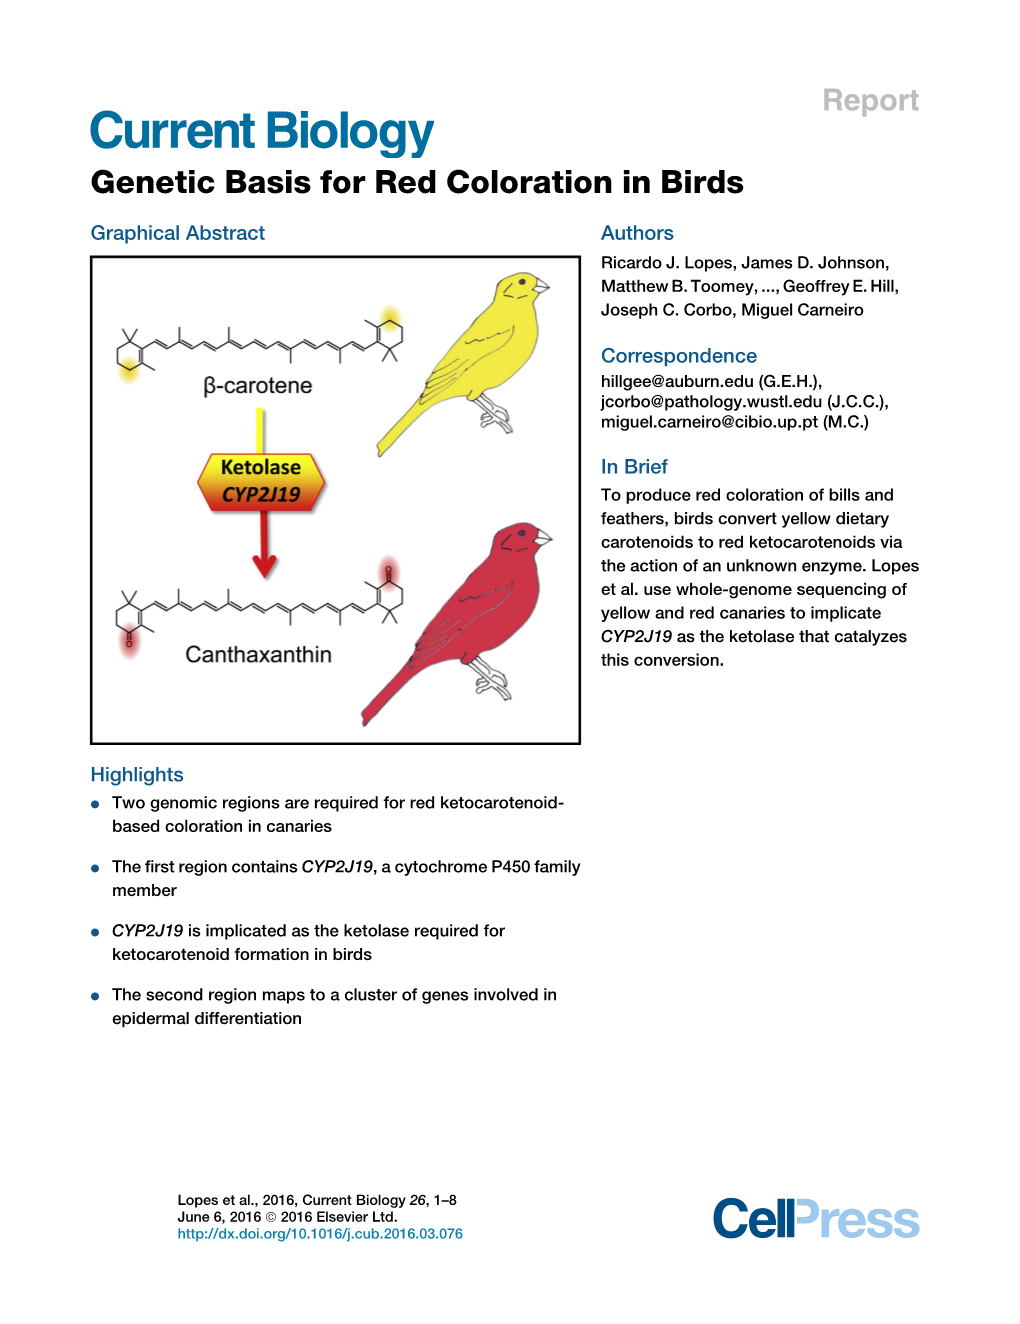 Genetic Basis for Red Coloration in Birds